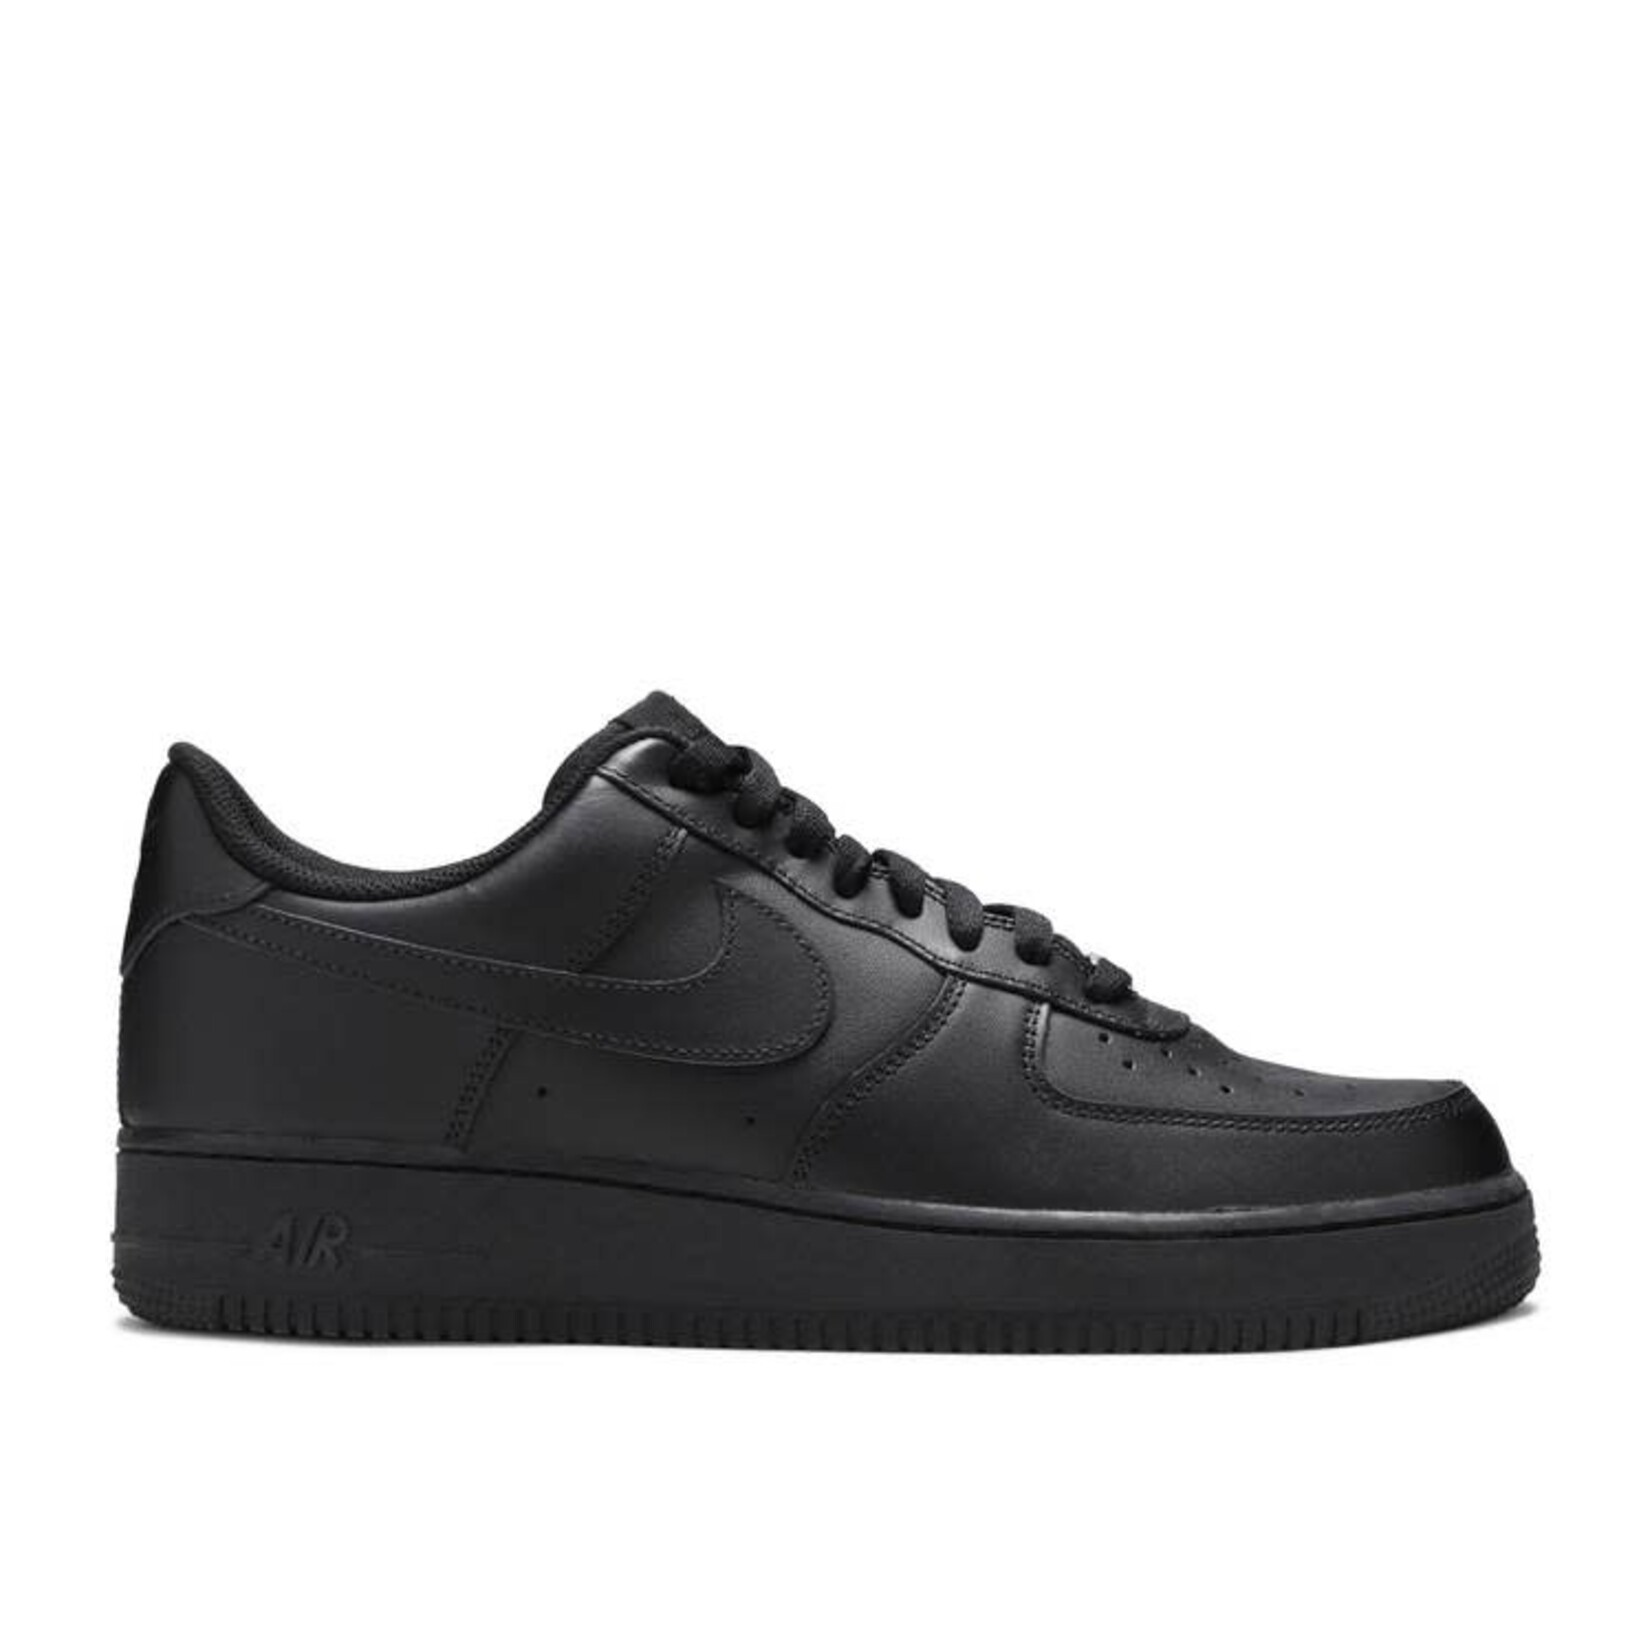 Nike Nike Air Force 1 Low '07 Black Size 10, DS BRAND NEW